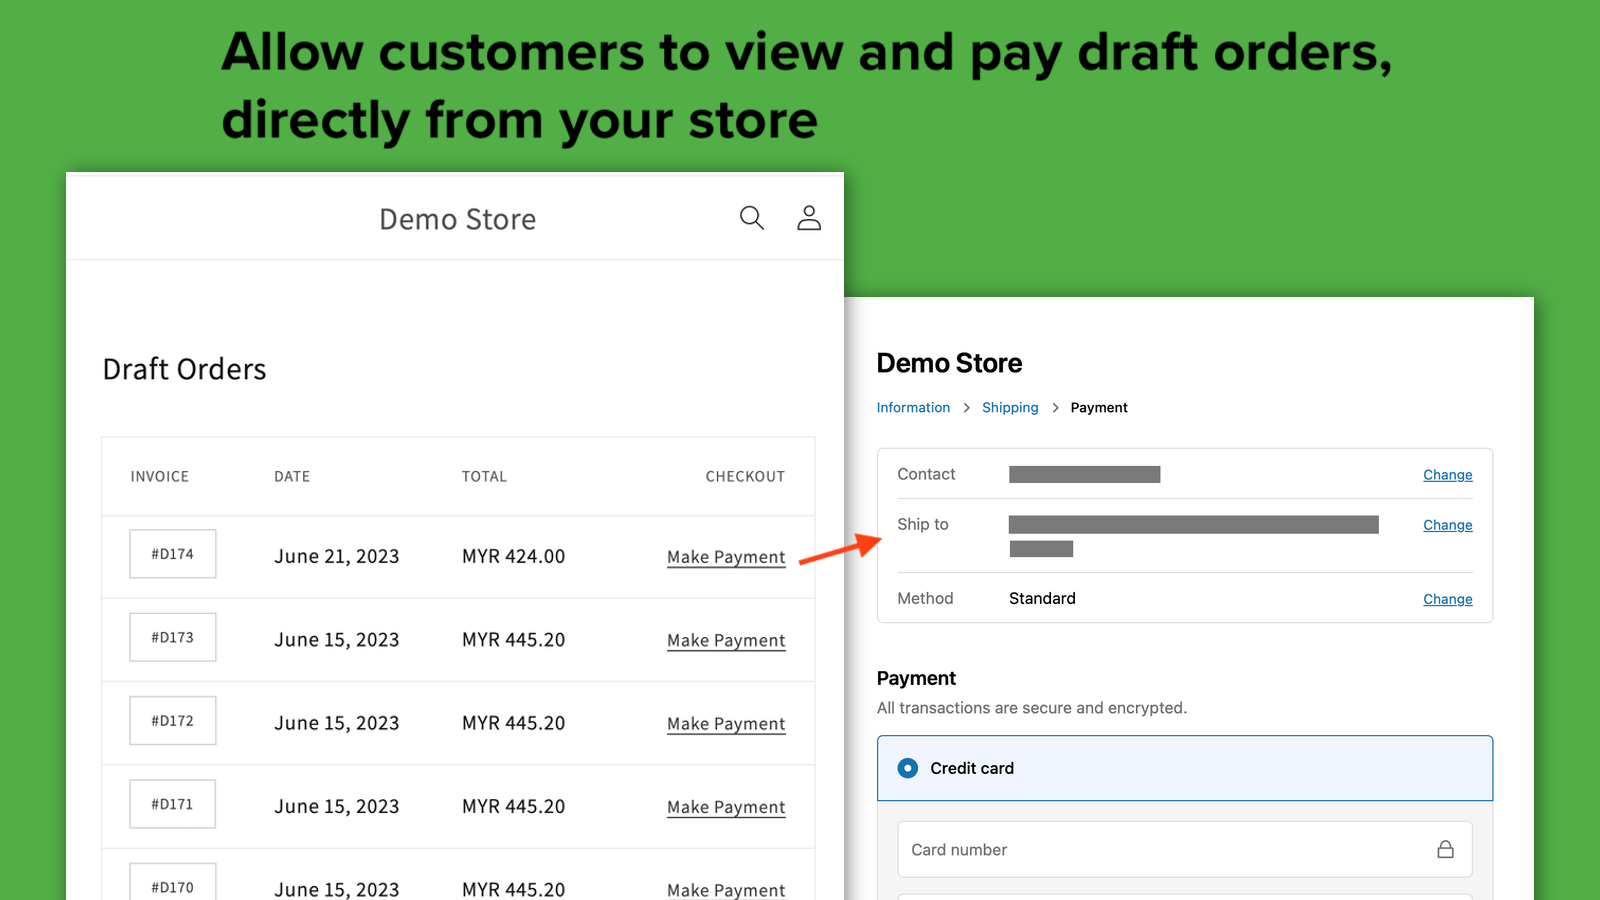 Customers can view their own draft orders and make payment